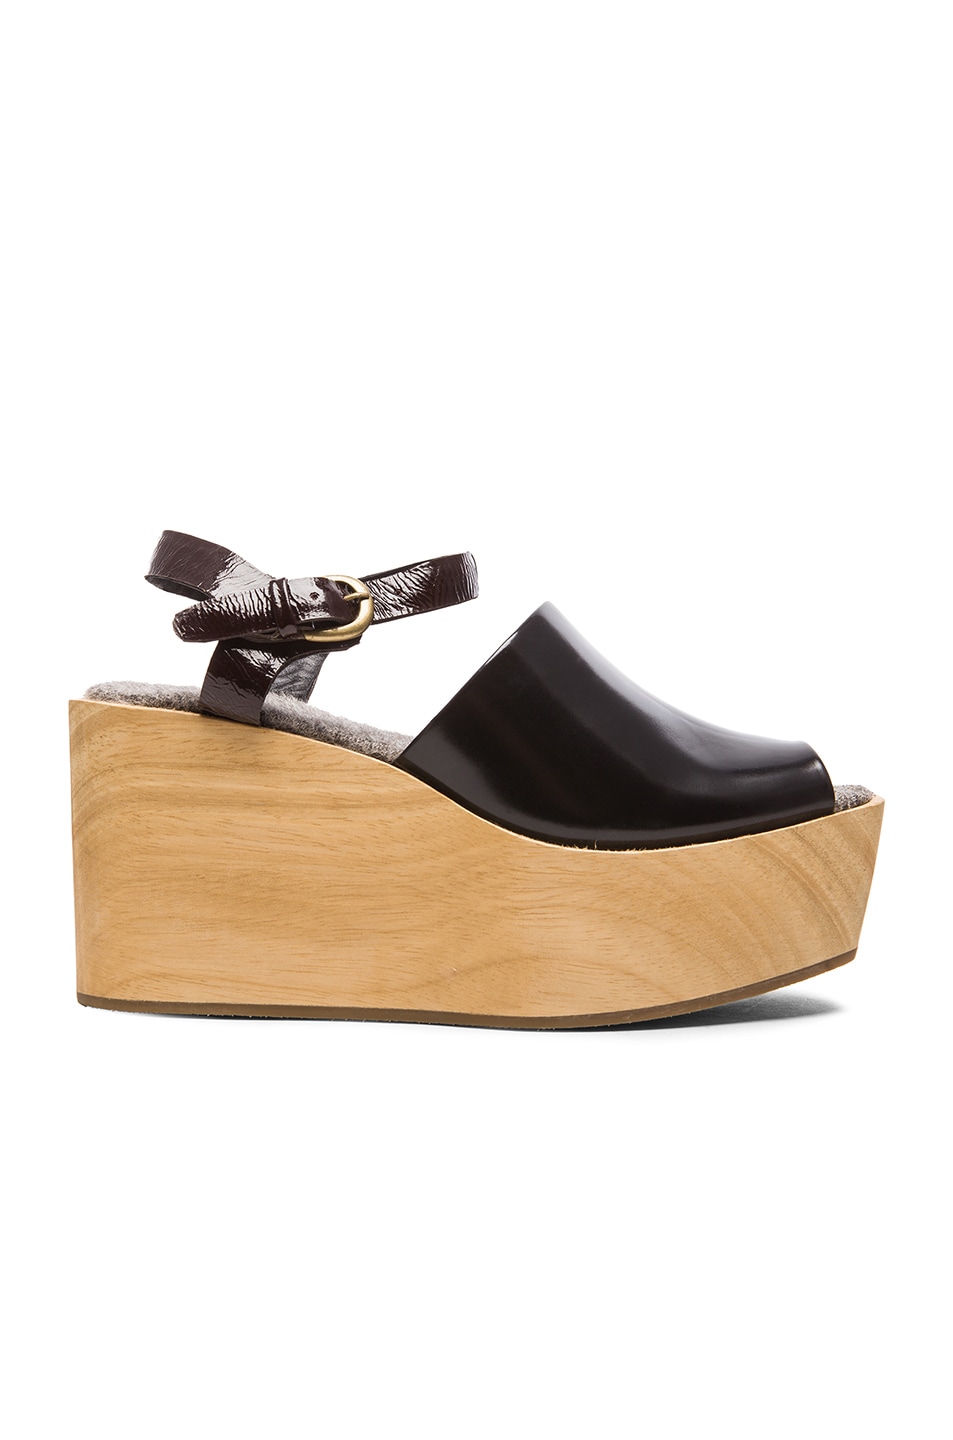 Image 1 of Rachel Comey Bowes Leather Wedges in Black Satinado